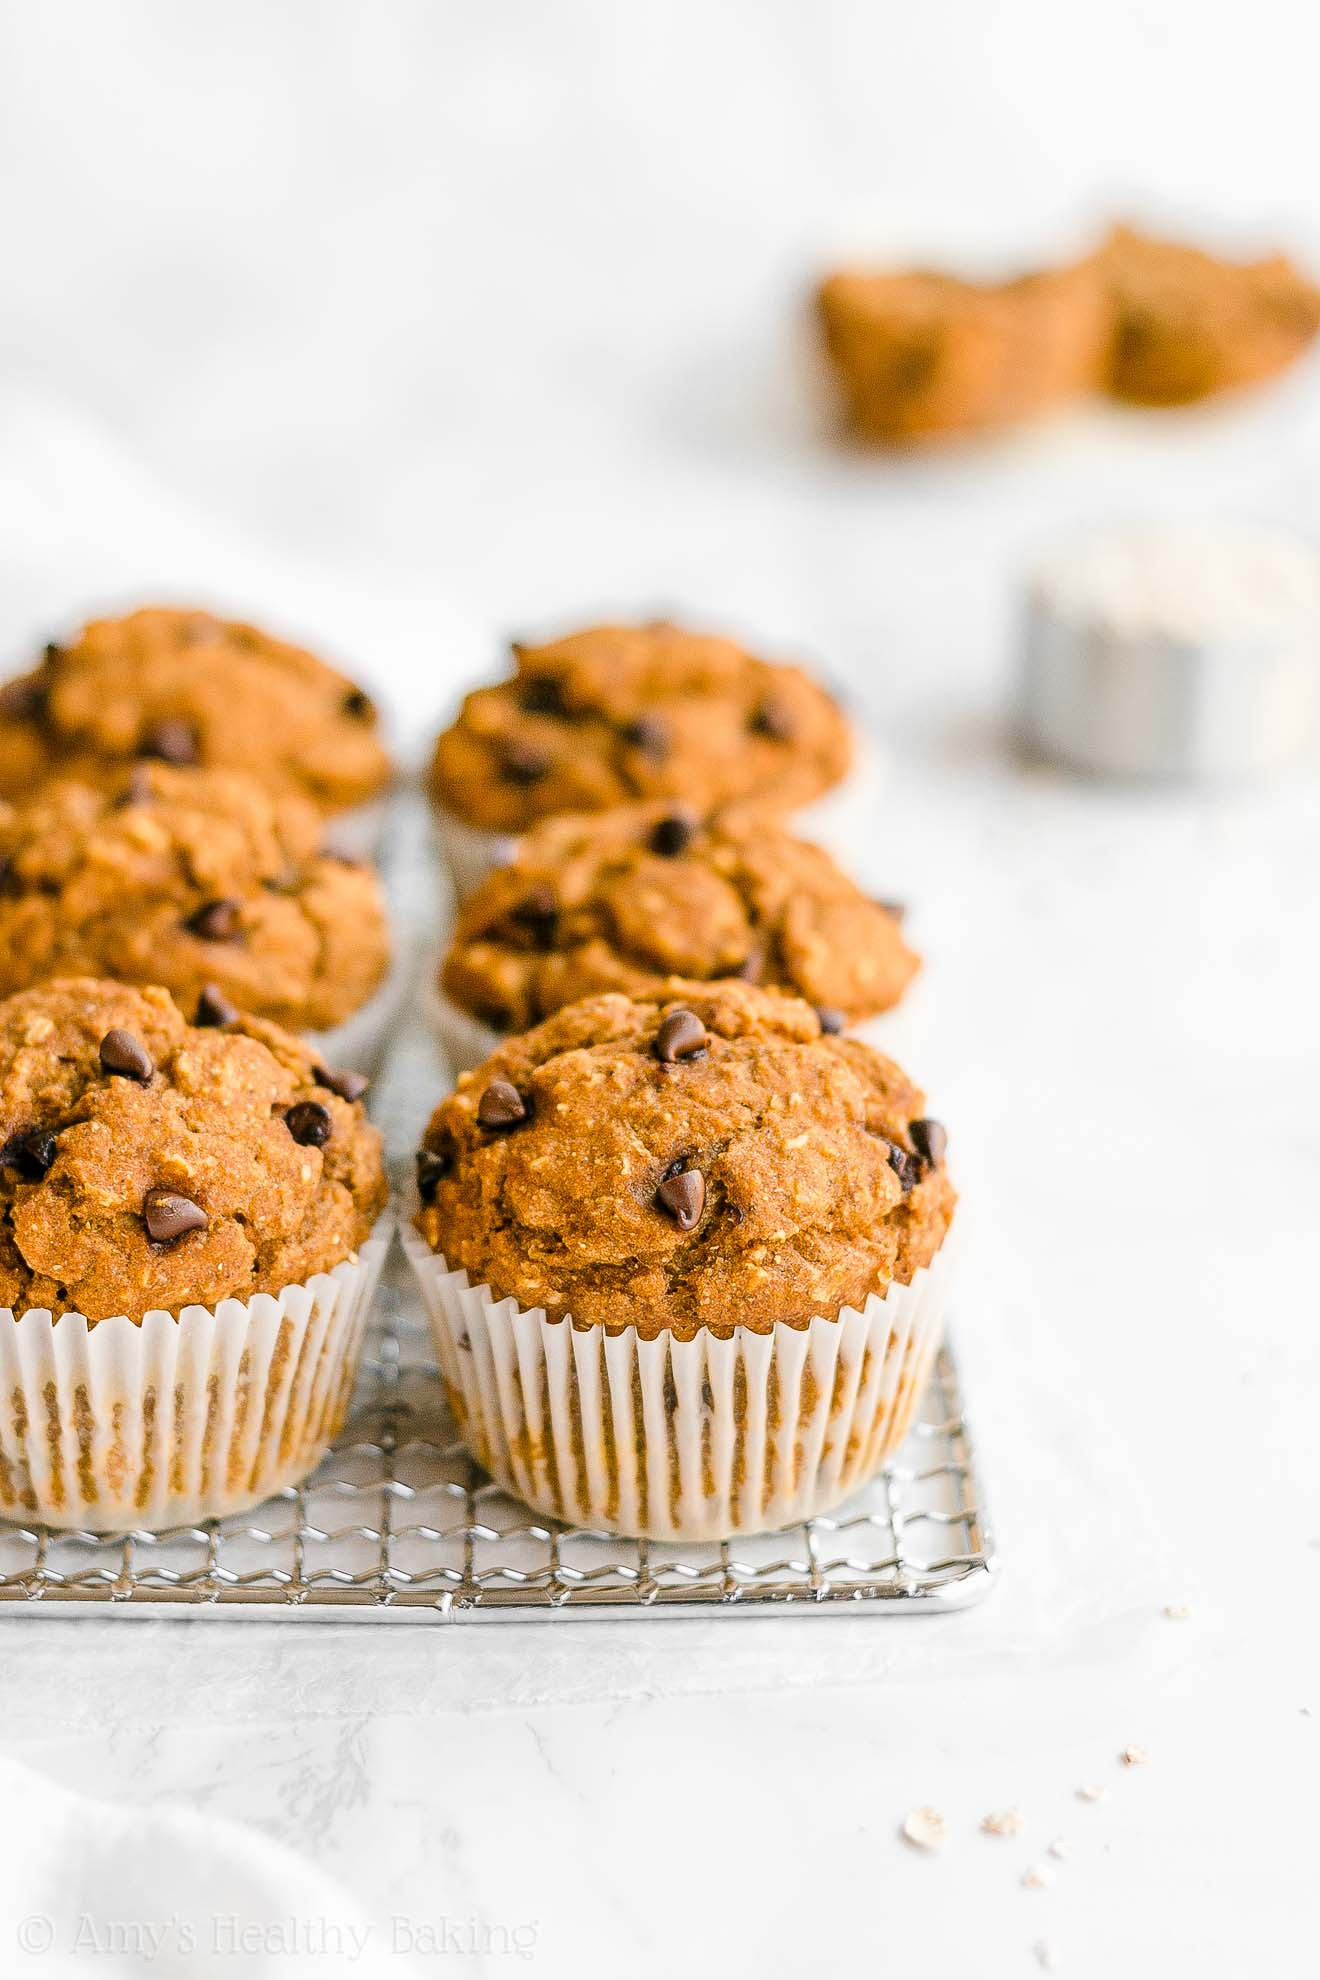 Healthy Oatmeal Chocolate Chip Muffins
 Healthy Pumpkin Chocolate Chip Oatmeal Muffins